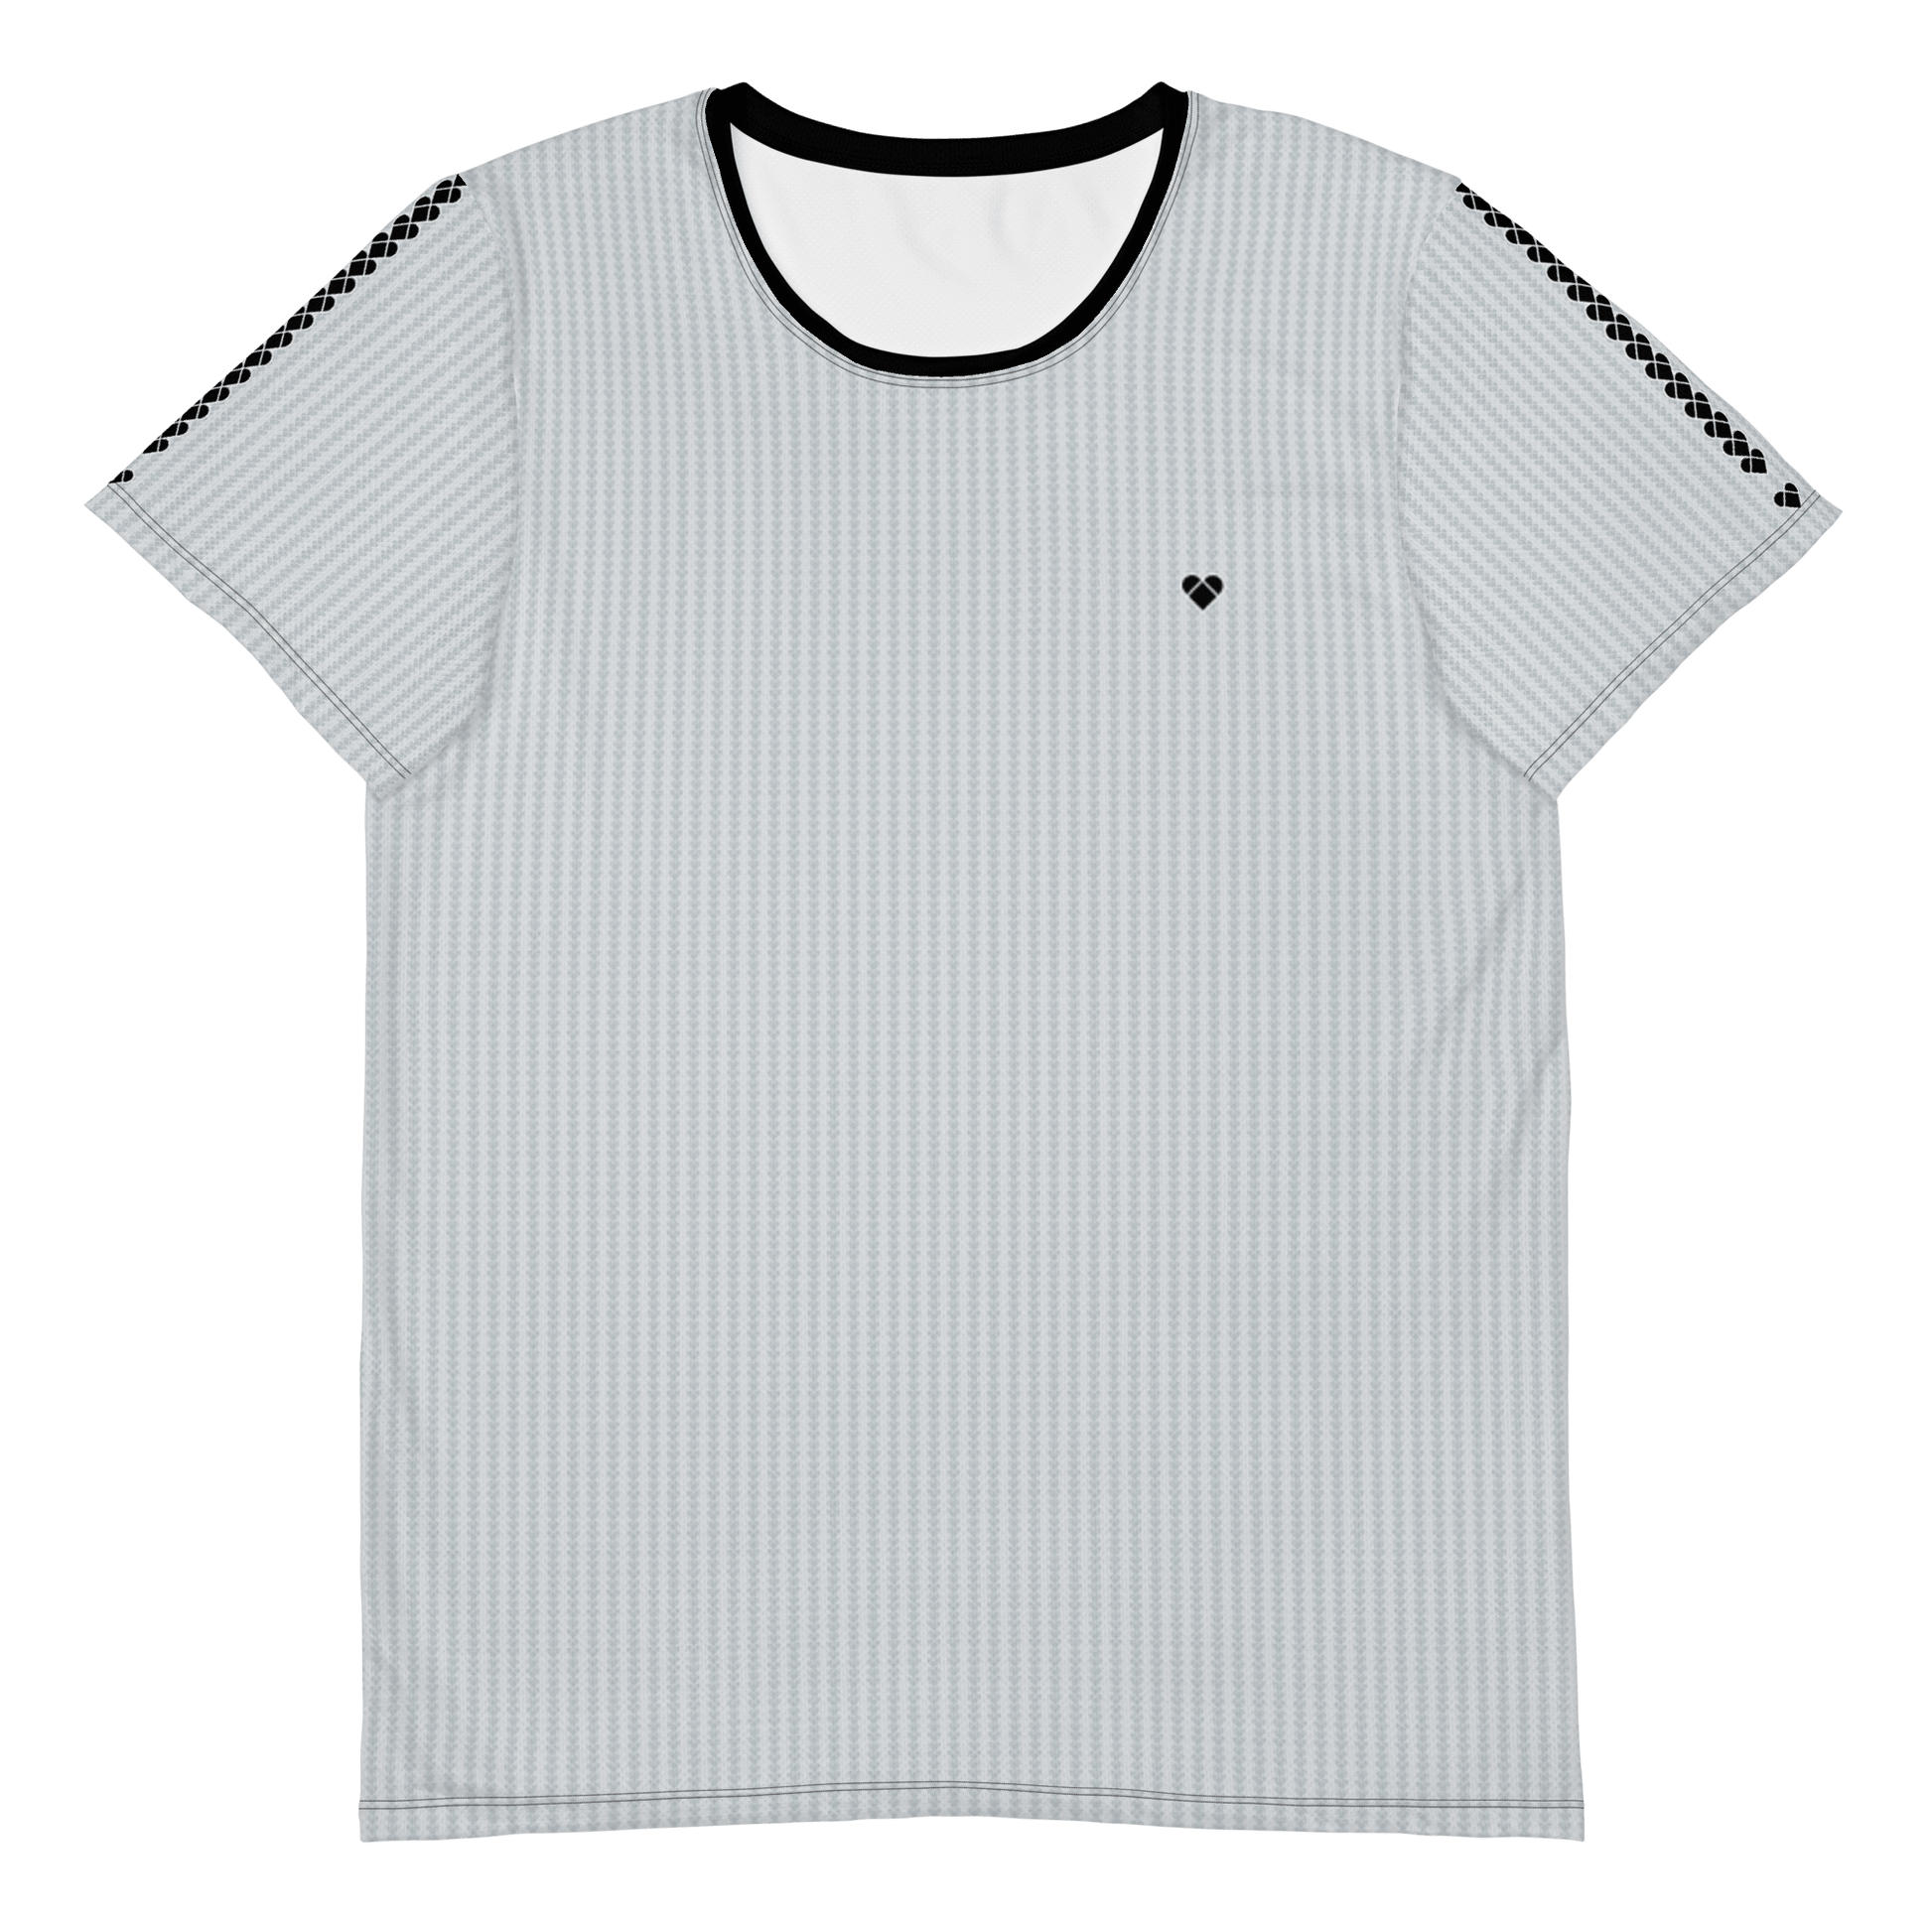 product photo front, Light gray sport shirt with black heart and heart logo stripe on sleeves for men from CRiZ AMOR's Amor Primero Capsule Collection